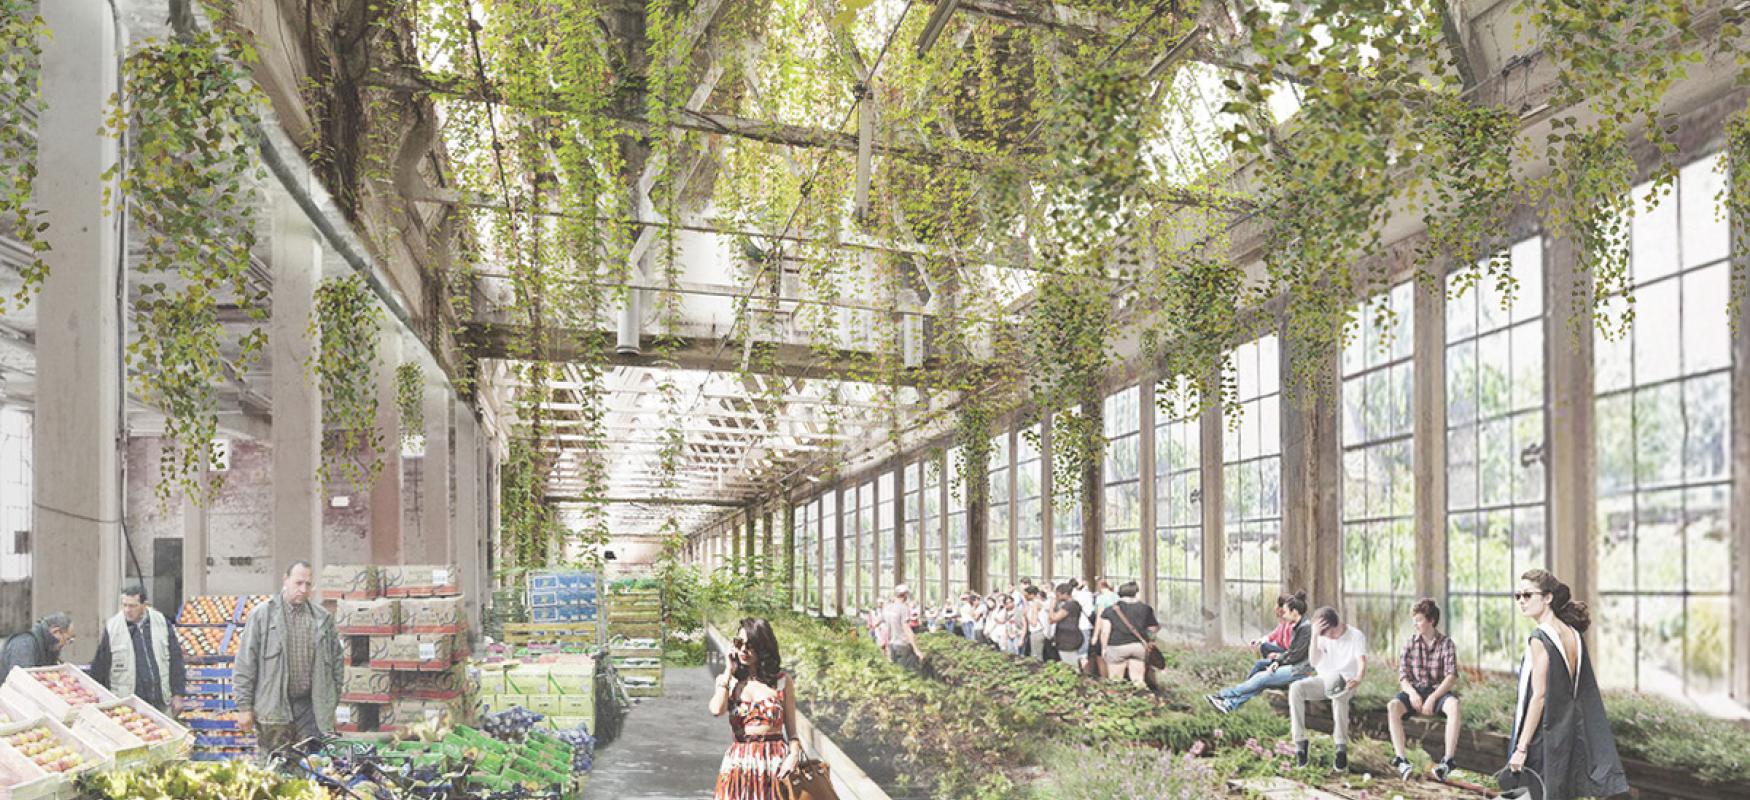 Render of the Co-op City project showing people shopping in an indoor farmers' market.